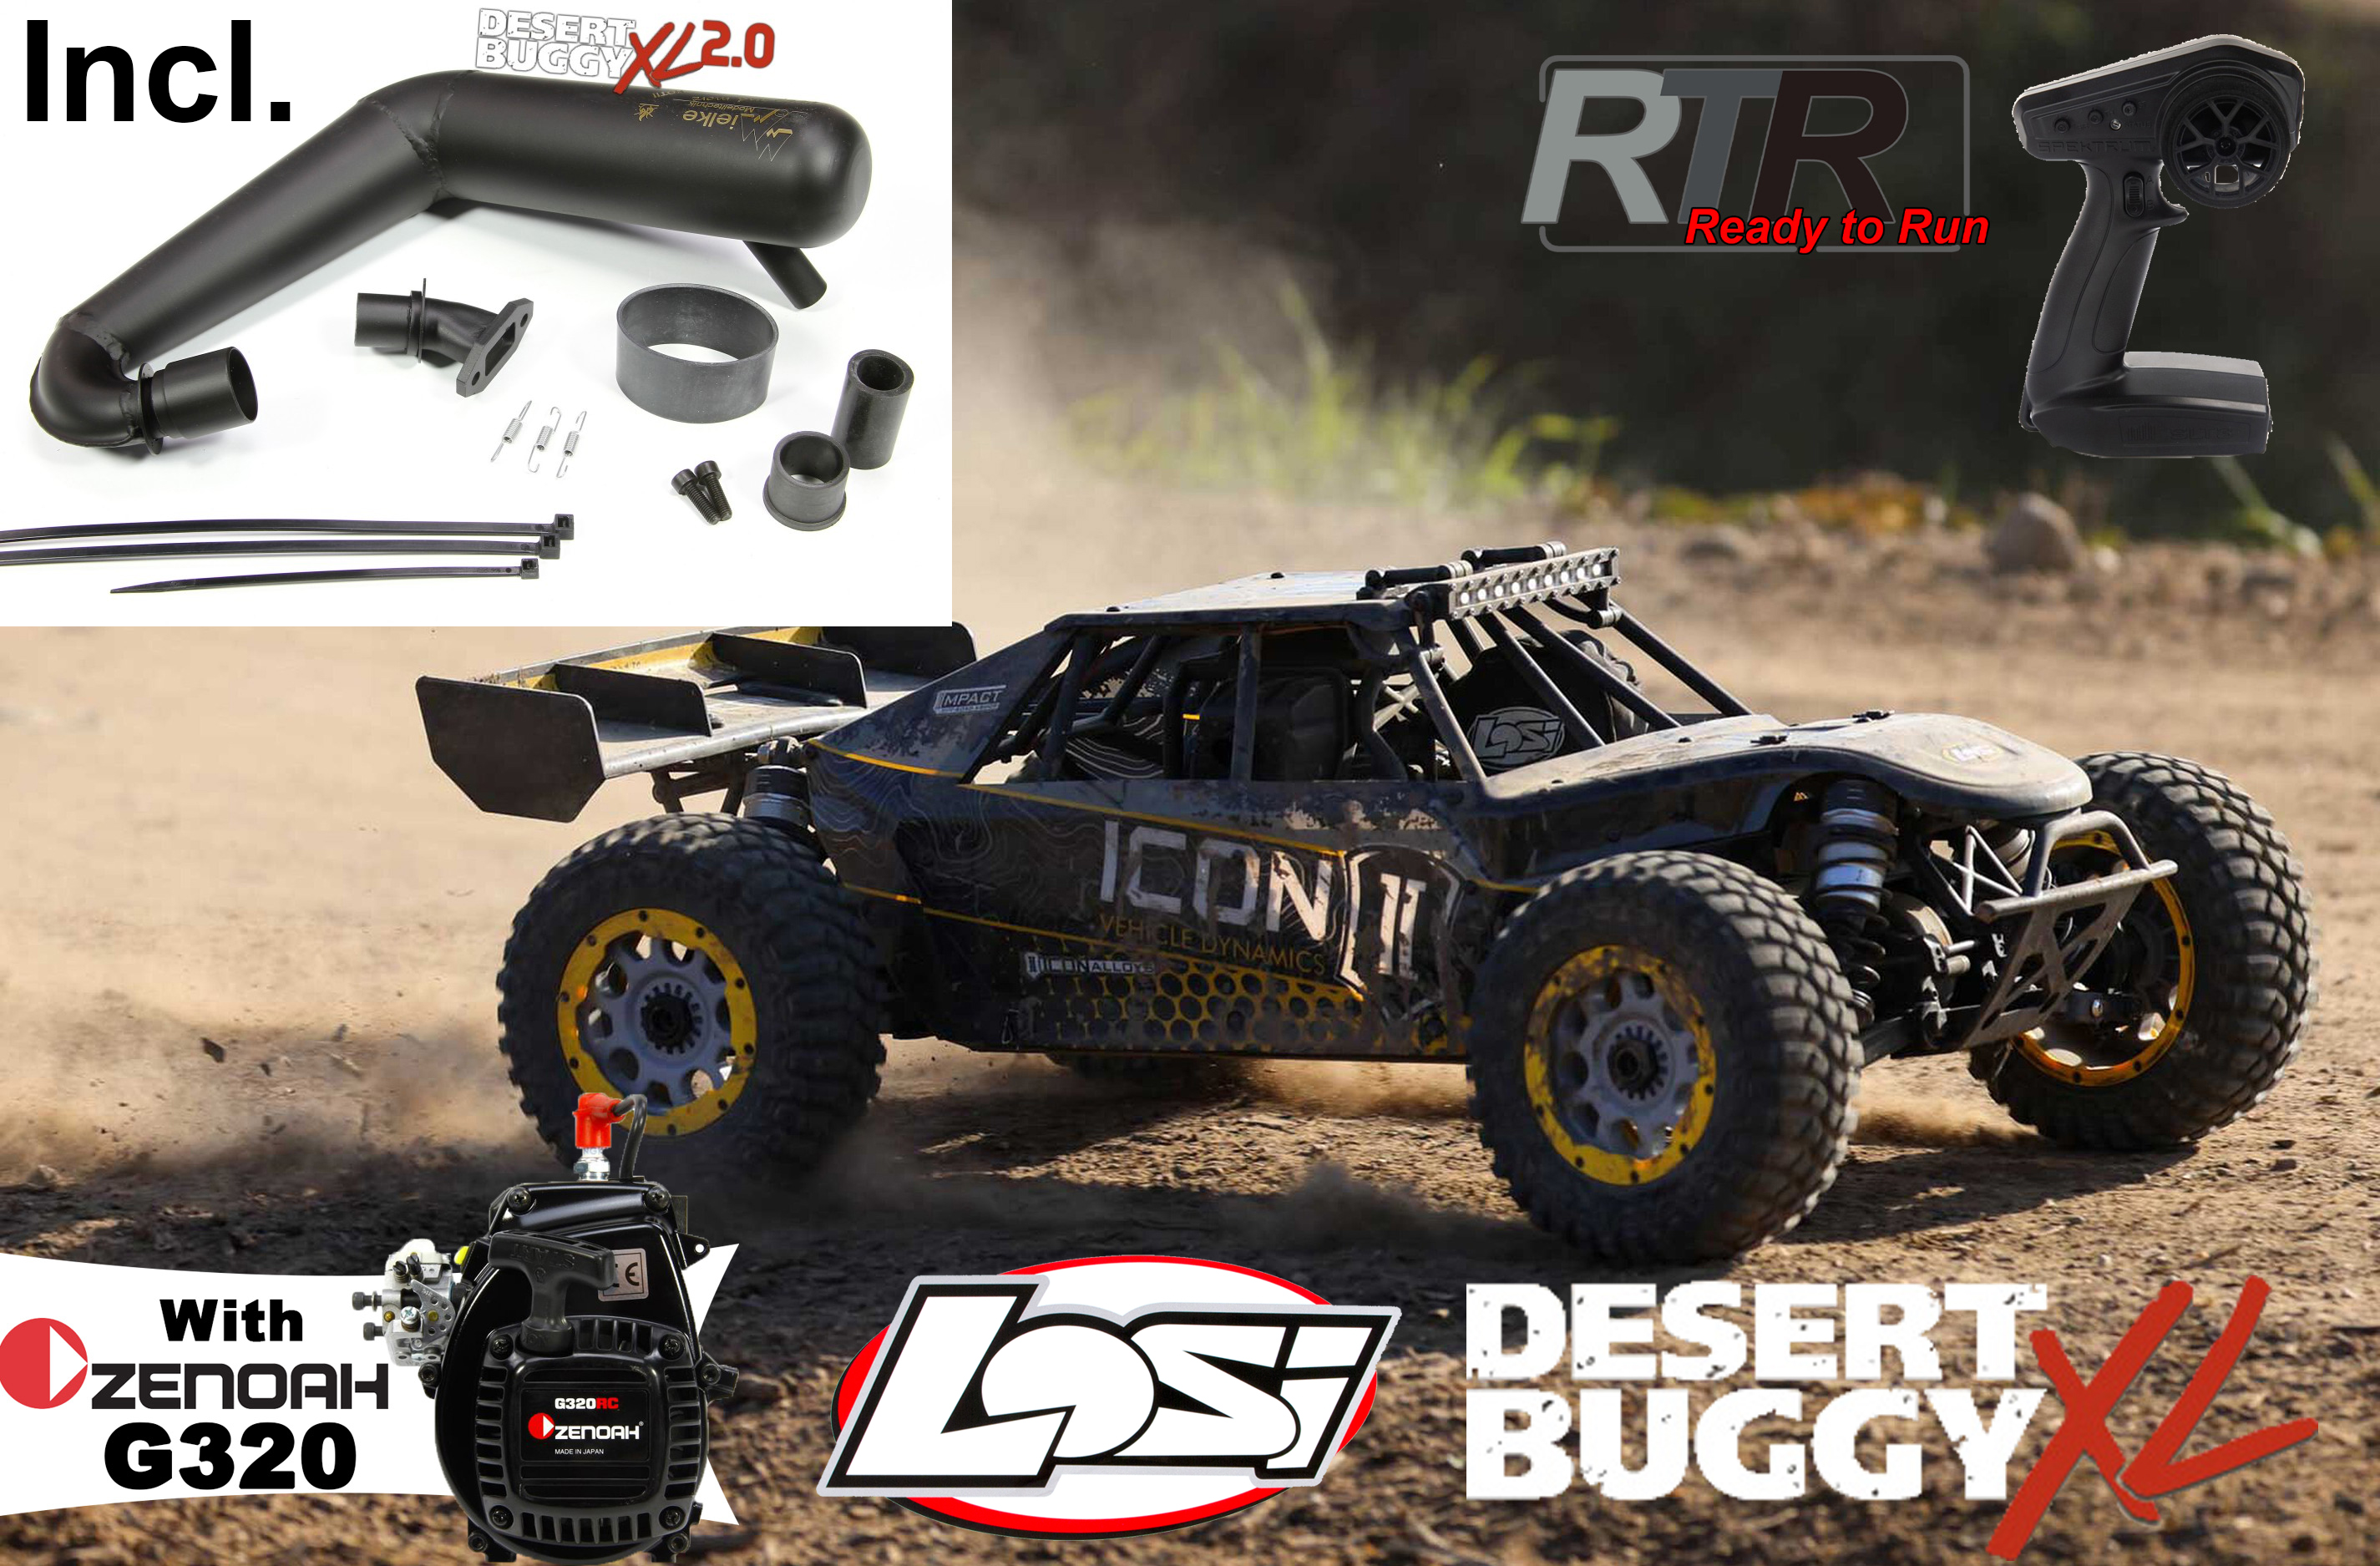 LOS05008T1 Losi 1/5 DBXL ICON 2.0 4WD, 320 Zenoah incl. Mielke tuned pipe exhaust Buggy RTR incl. assembly